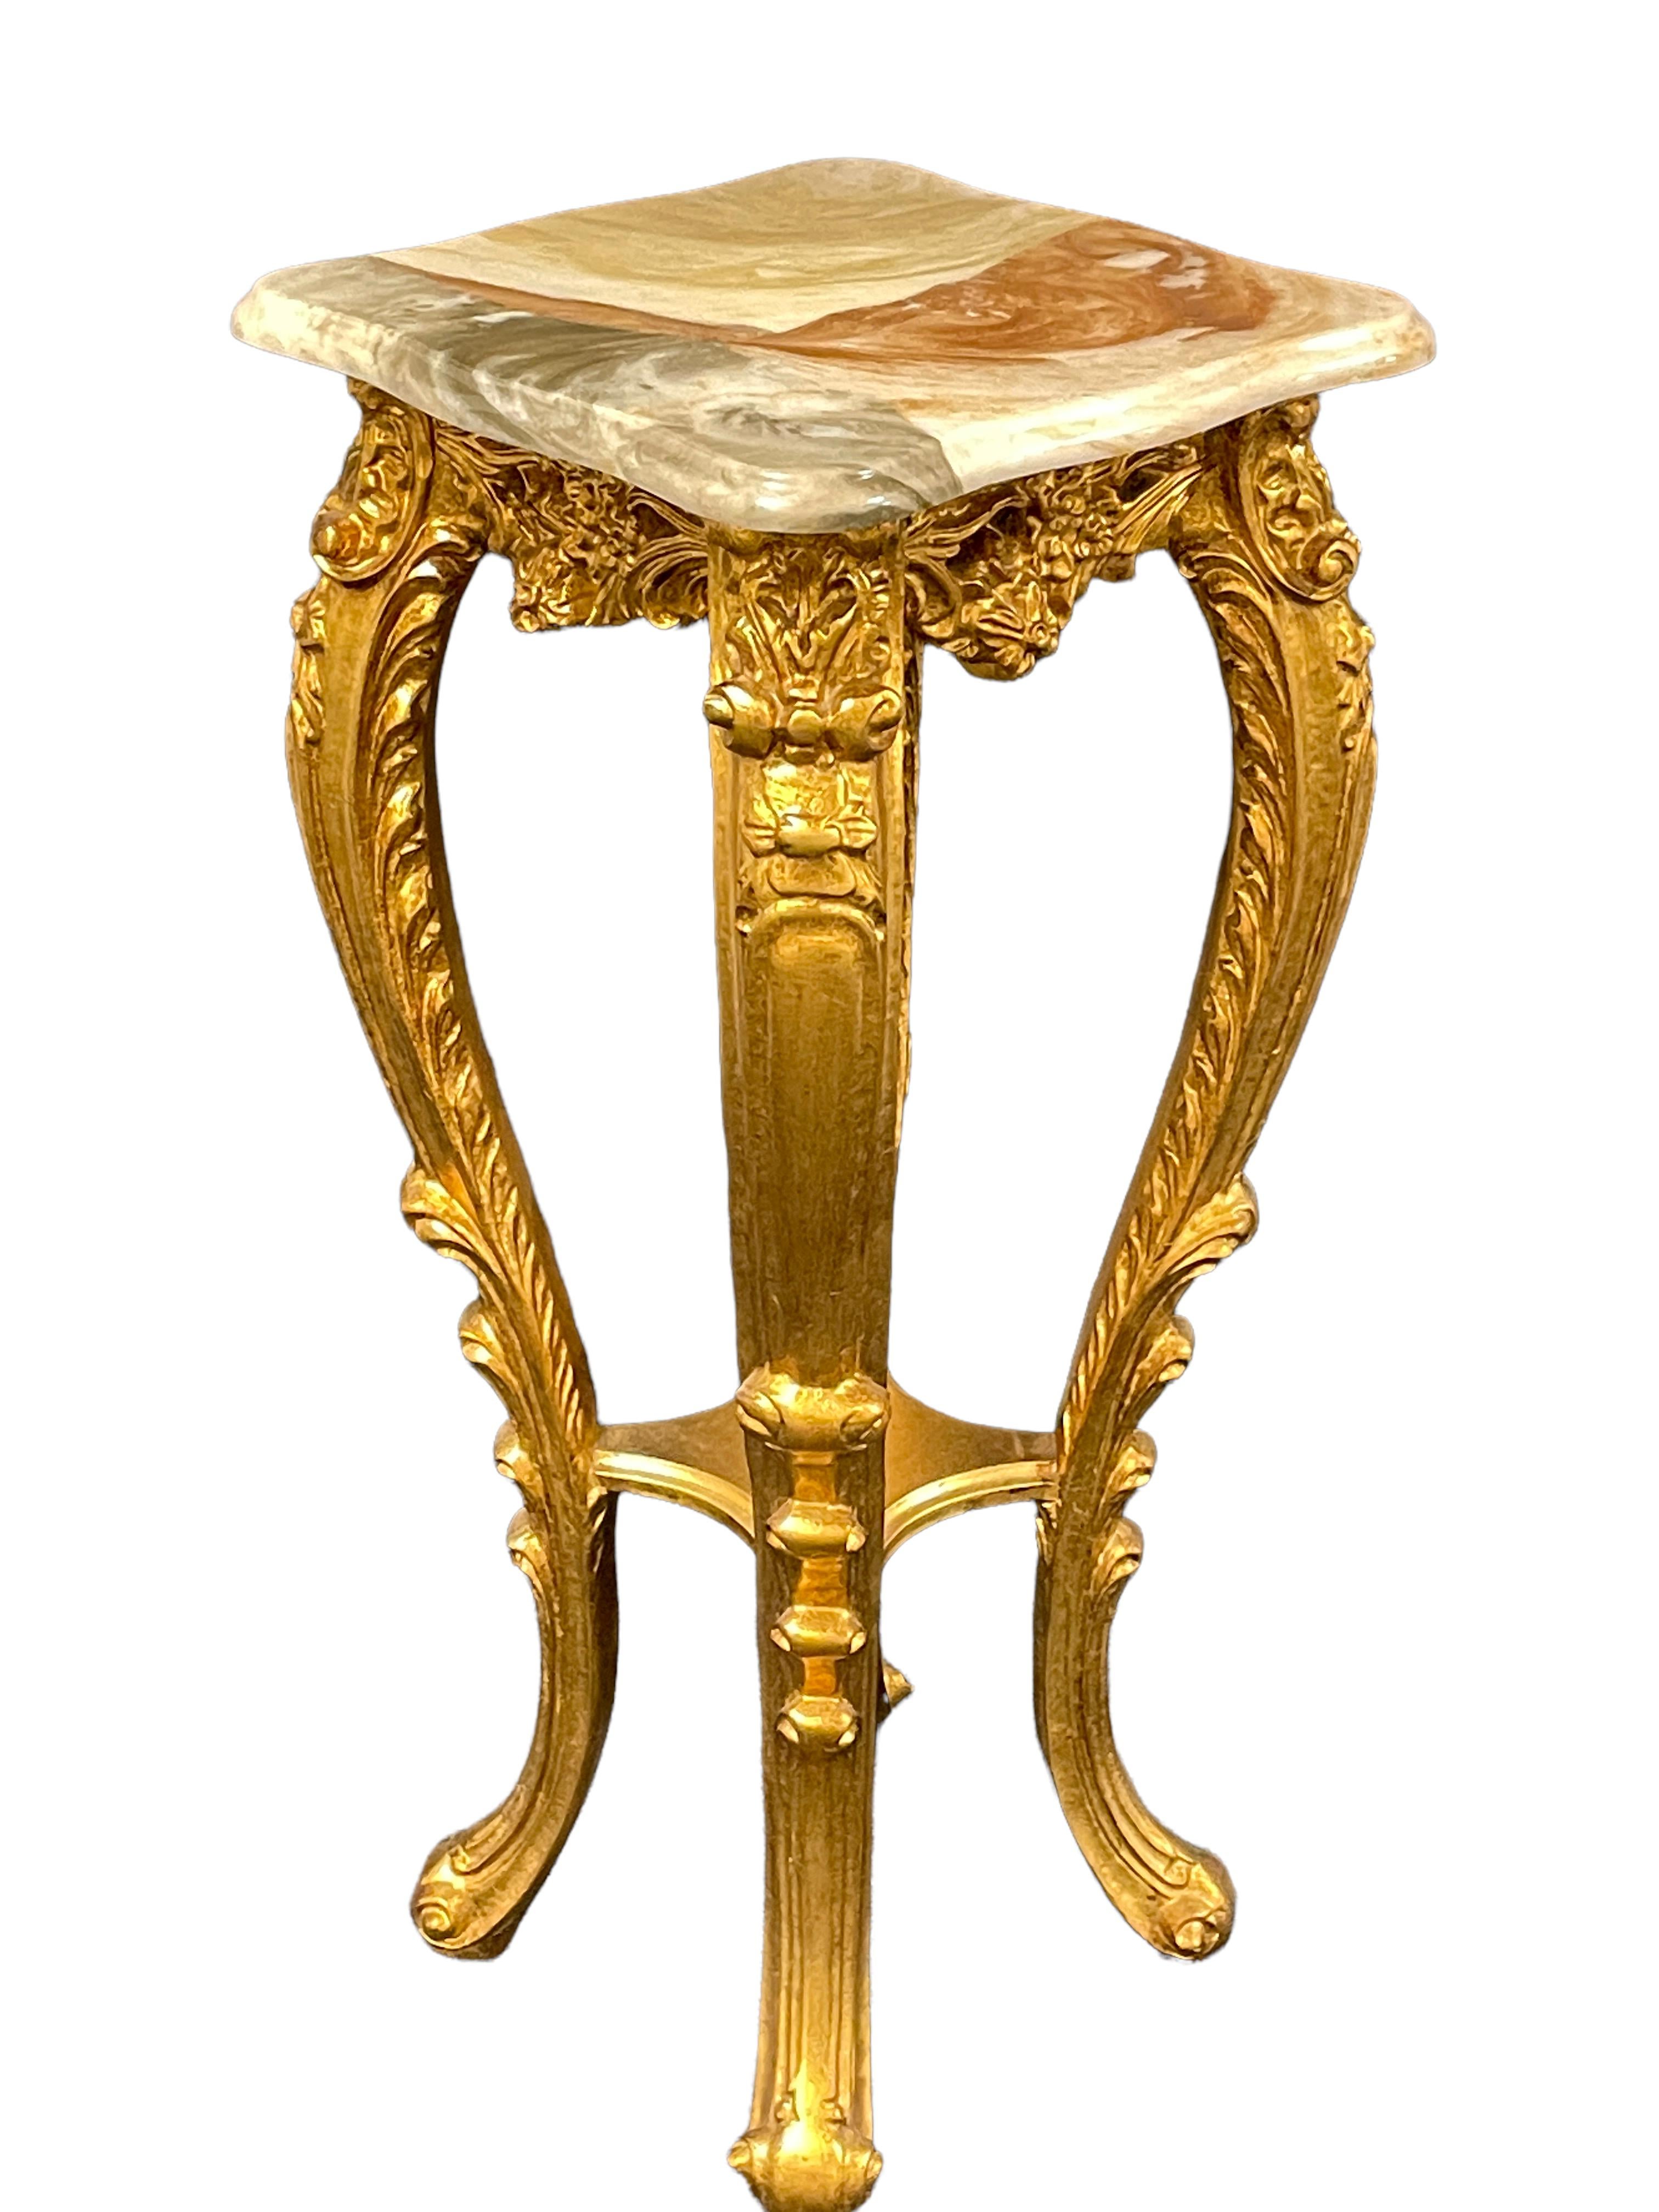 Italian 20th Century Carved Gilt Wood Toleware Console Pedestal Table, Italy For Sale